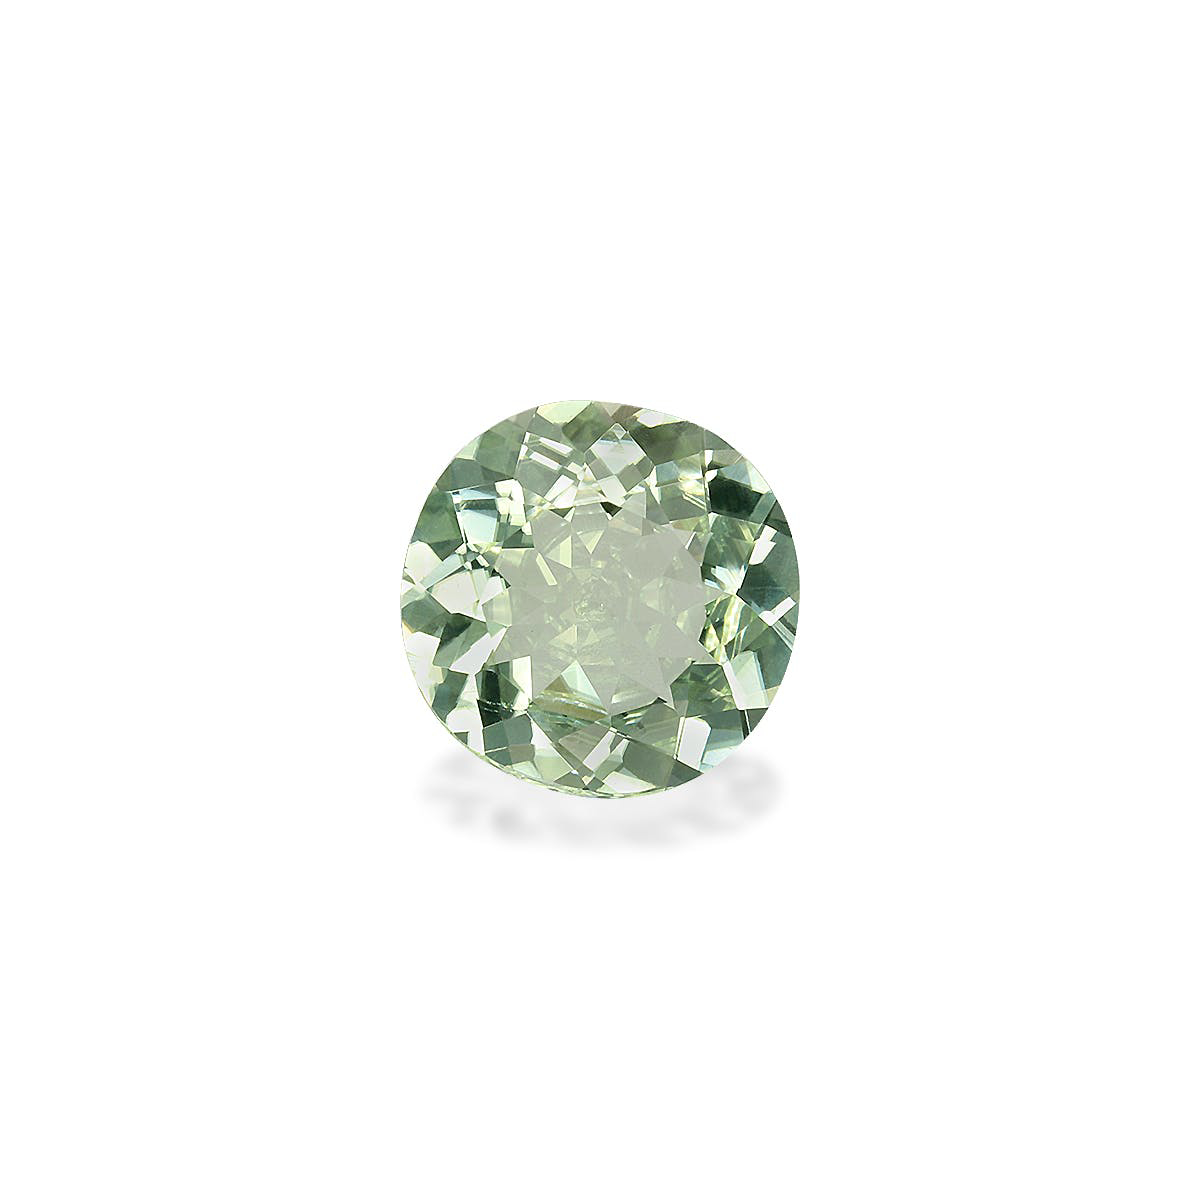 Picture of Pale Green Paraiba Tourmaline 1.25ct - 7mm (PA1568)